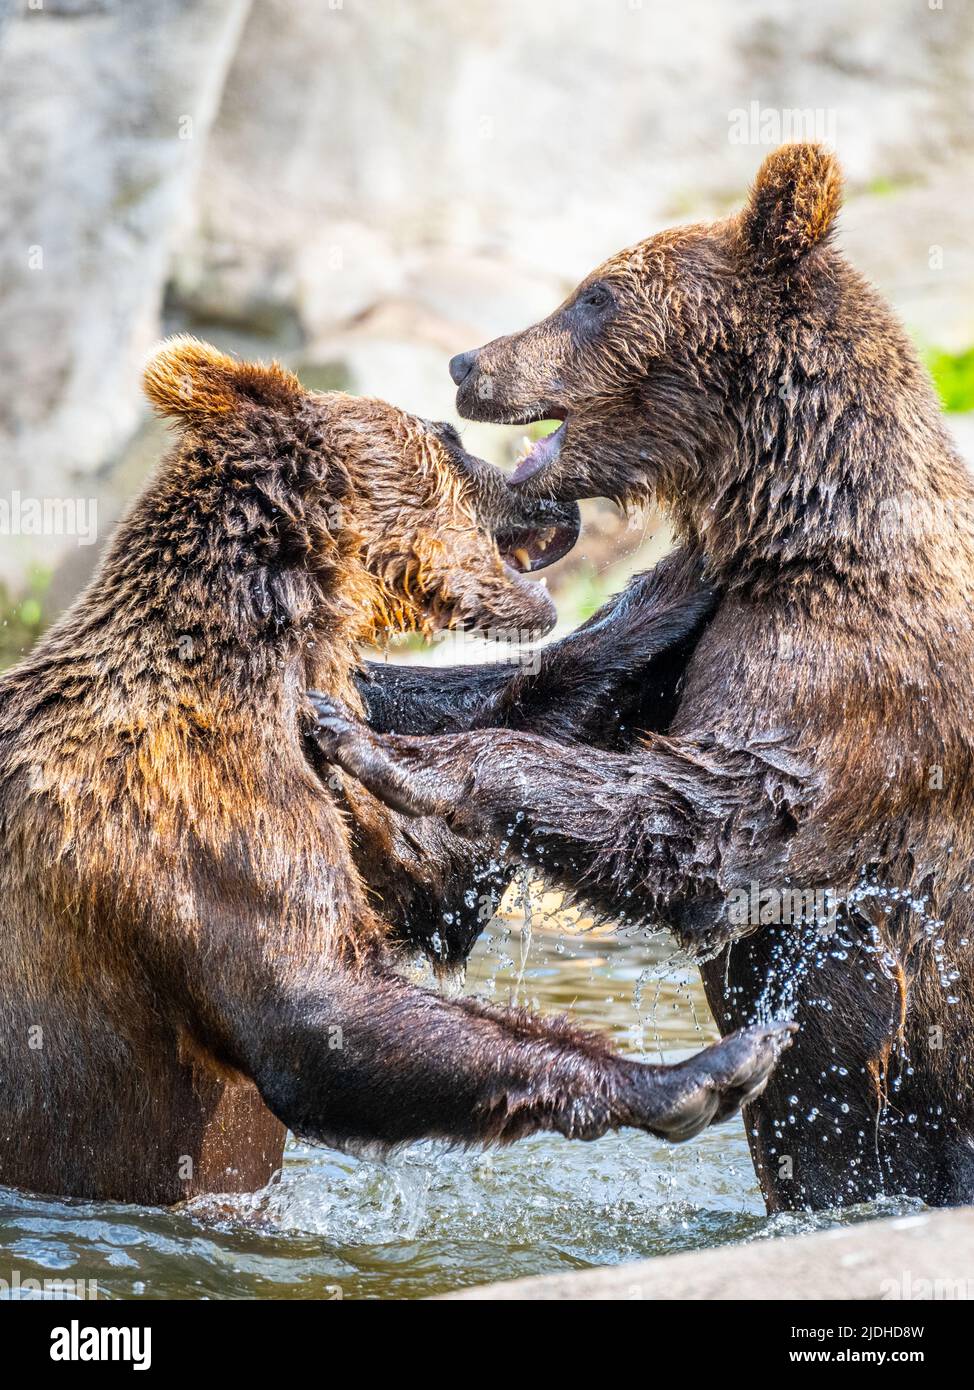 Two brown bears fighting in the water Stock Photo